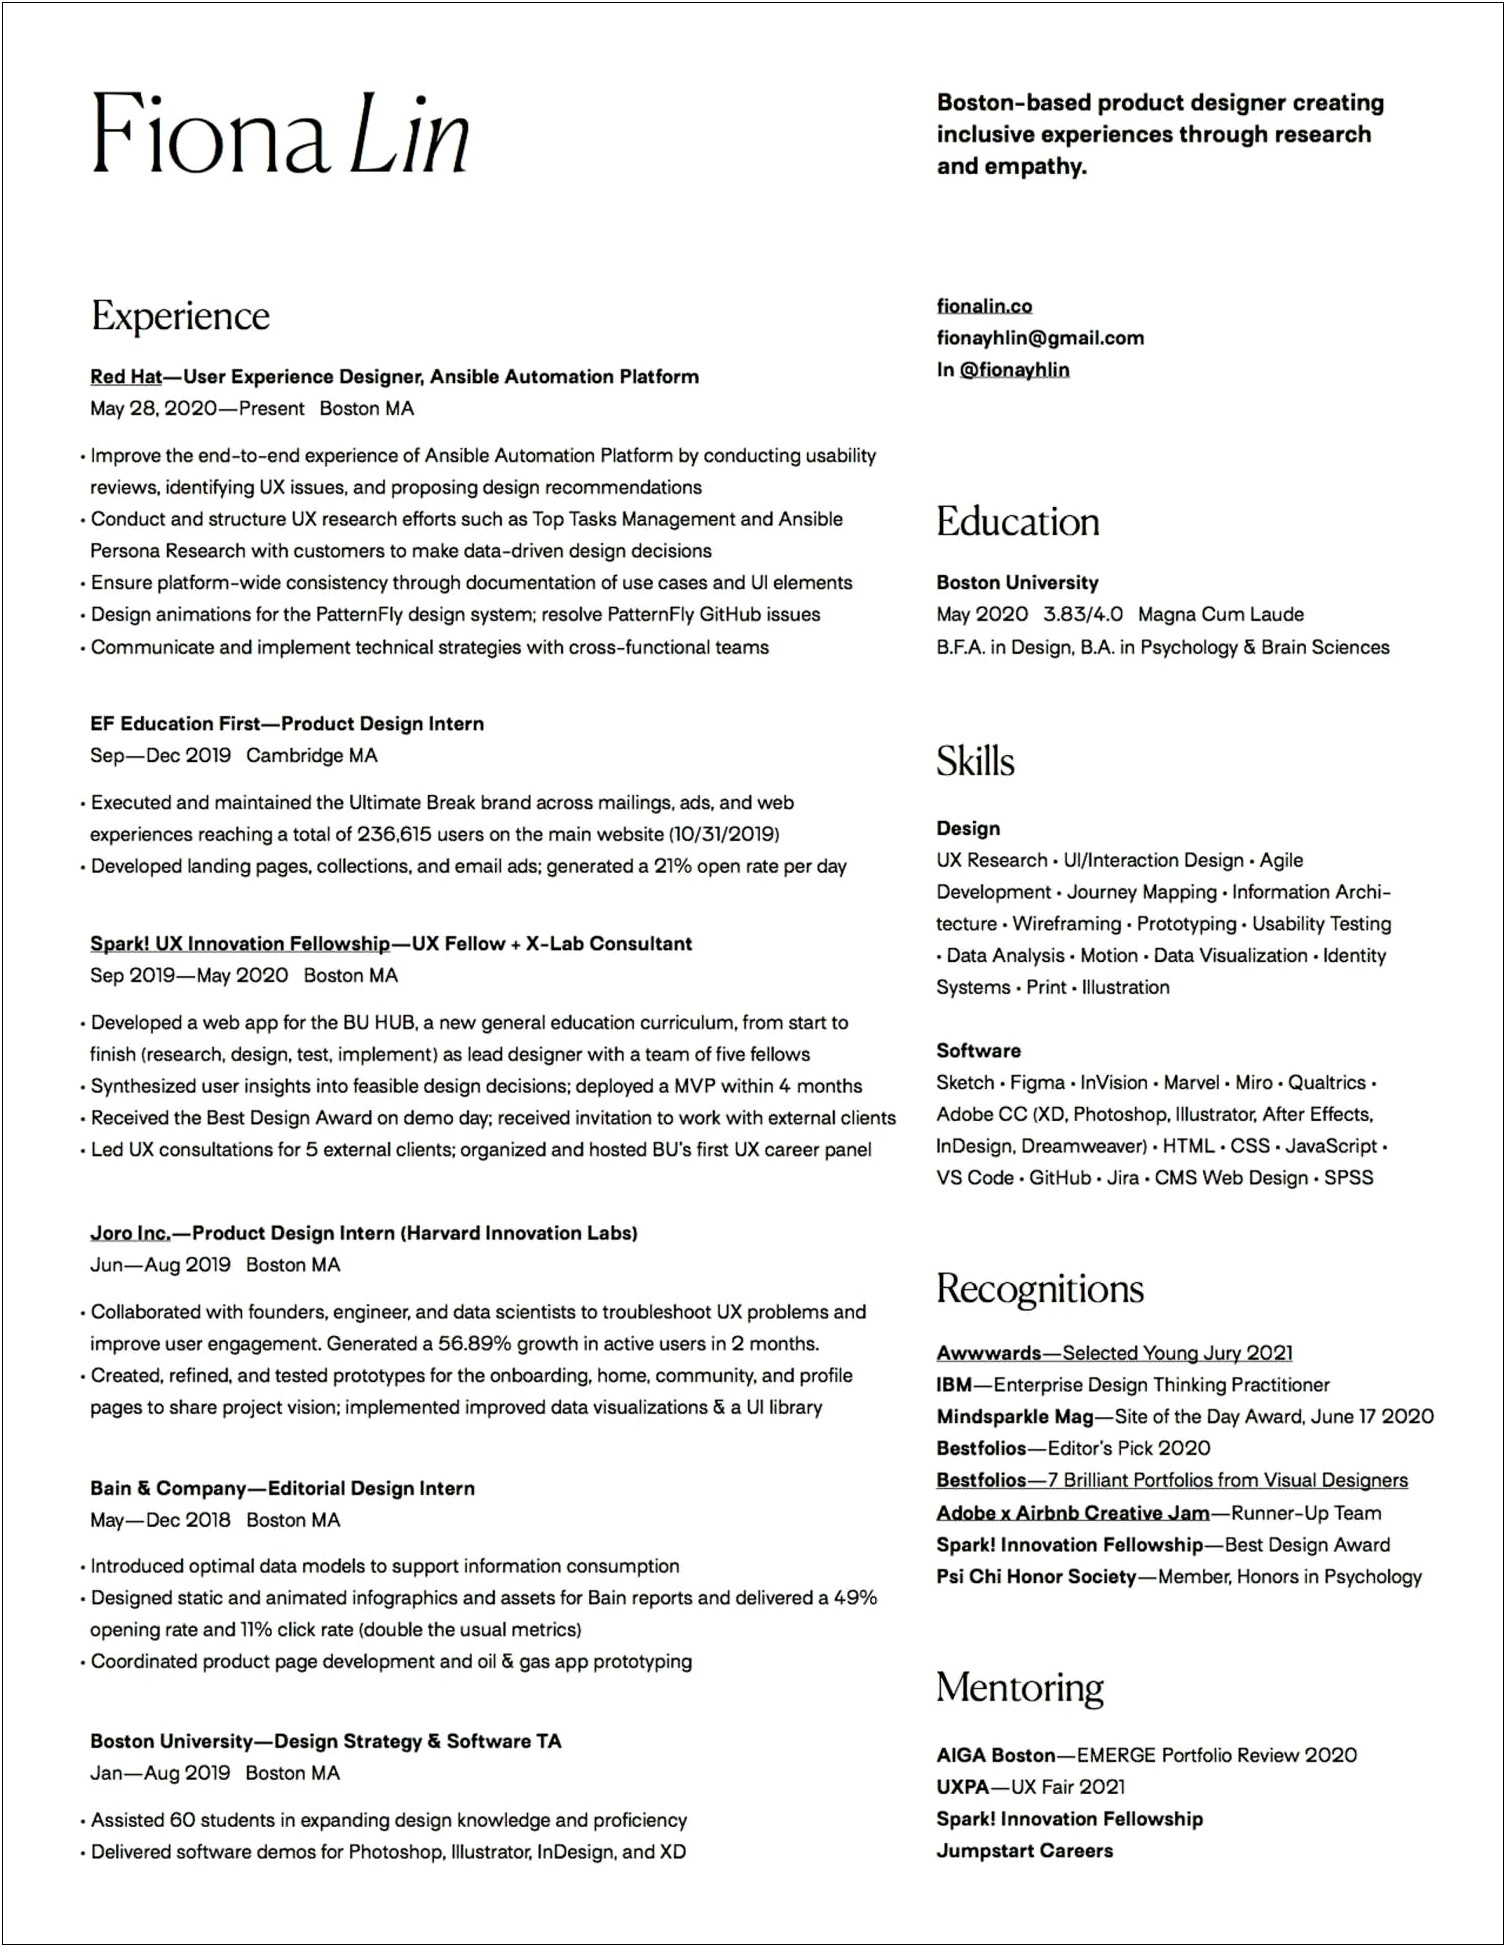 Where To Put Your Website On A Resume